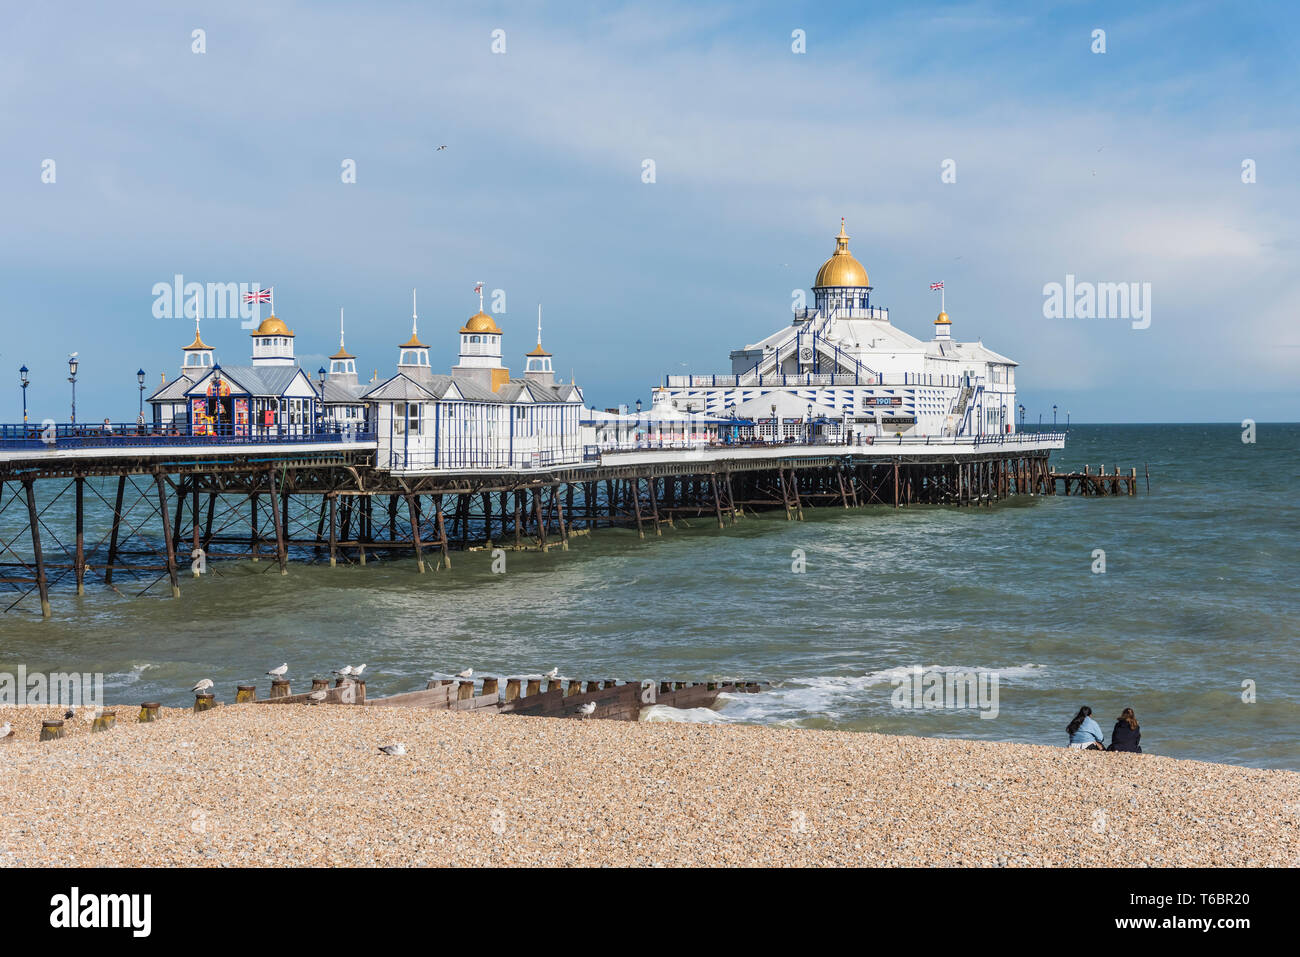 Eastbourne. The promenade and pier at the popular holiday resort of Eastbourne on the East Sussex coast of southeast England Stock Photo